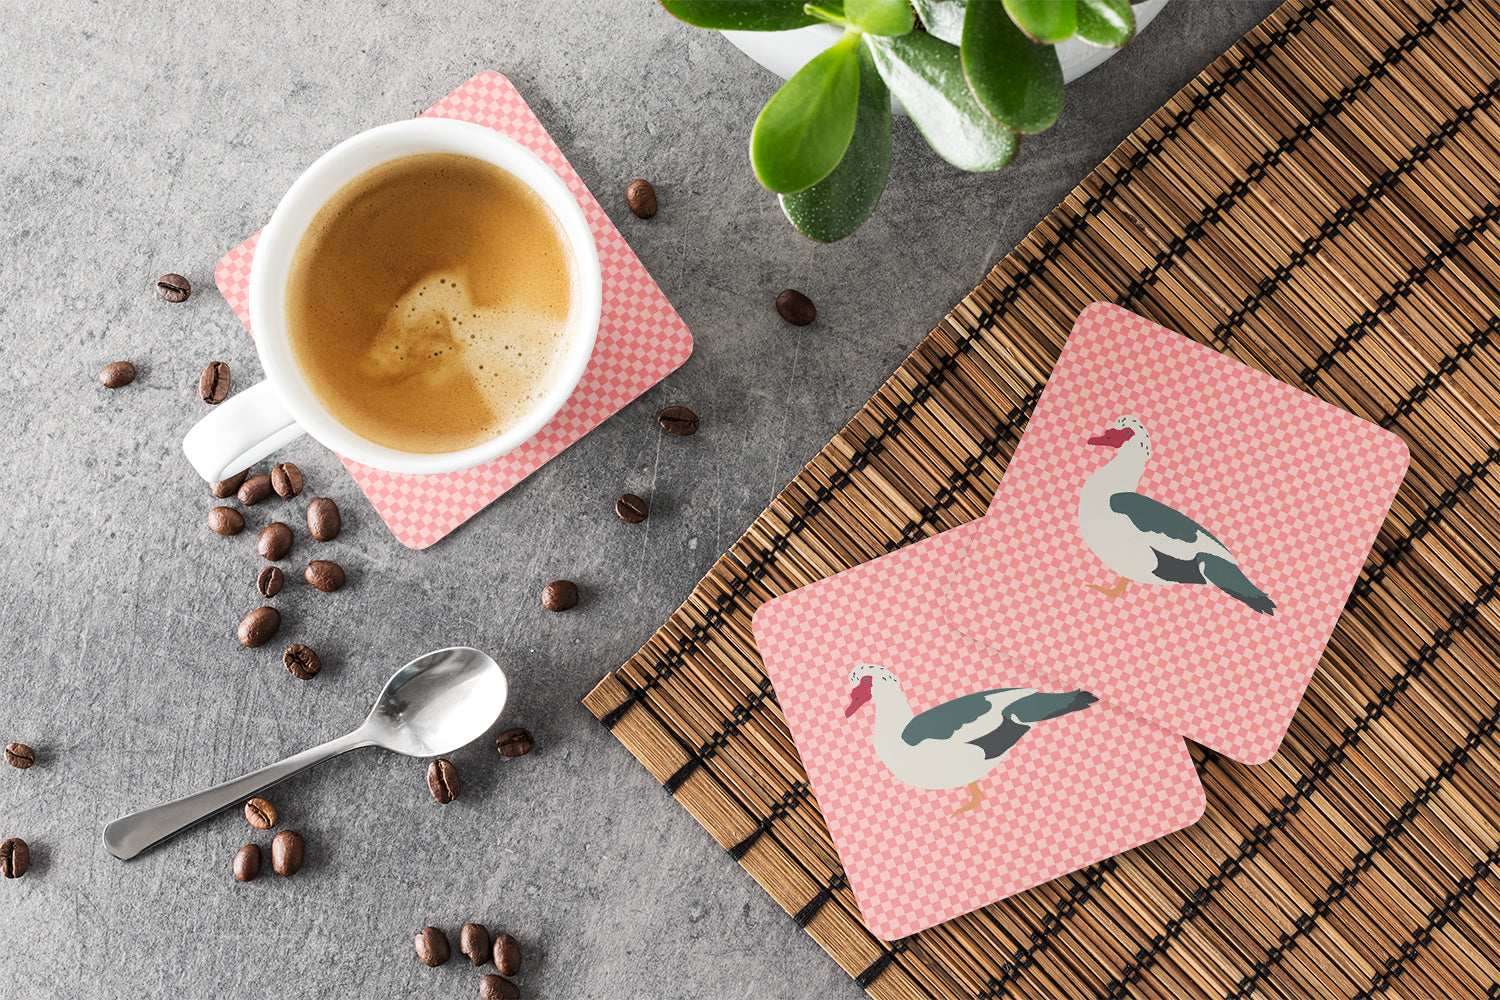 Muscovy Duck Pink Check Foam Coaster Set of 4 BB7864FC - the-store.com